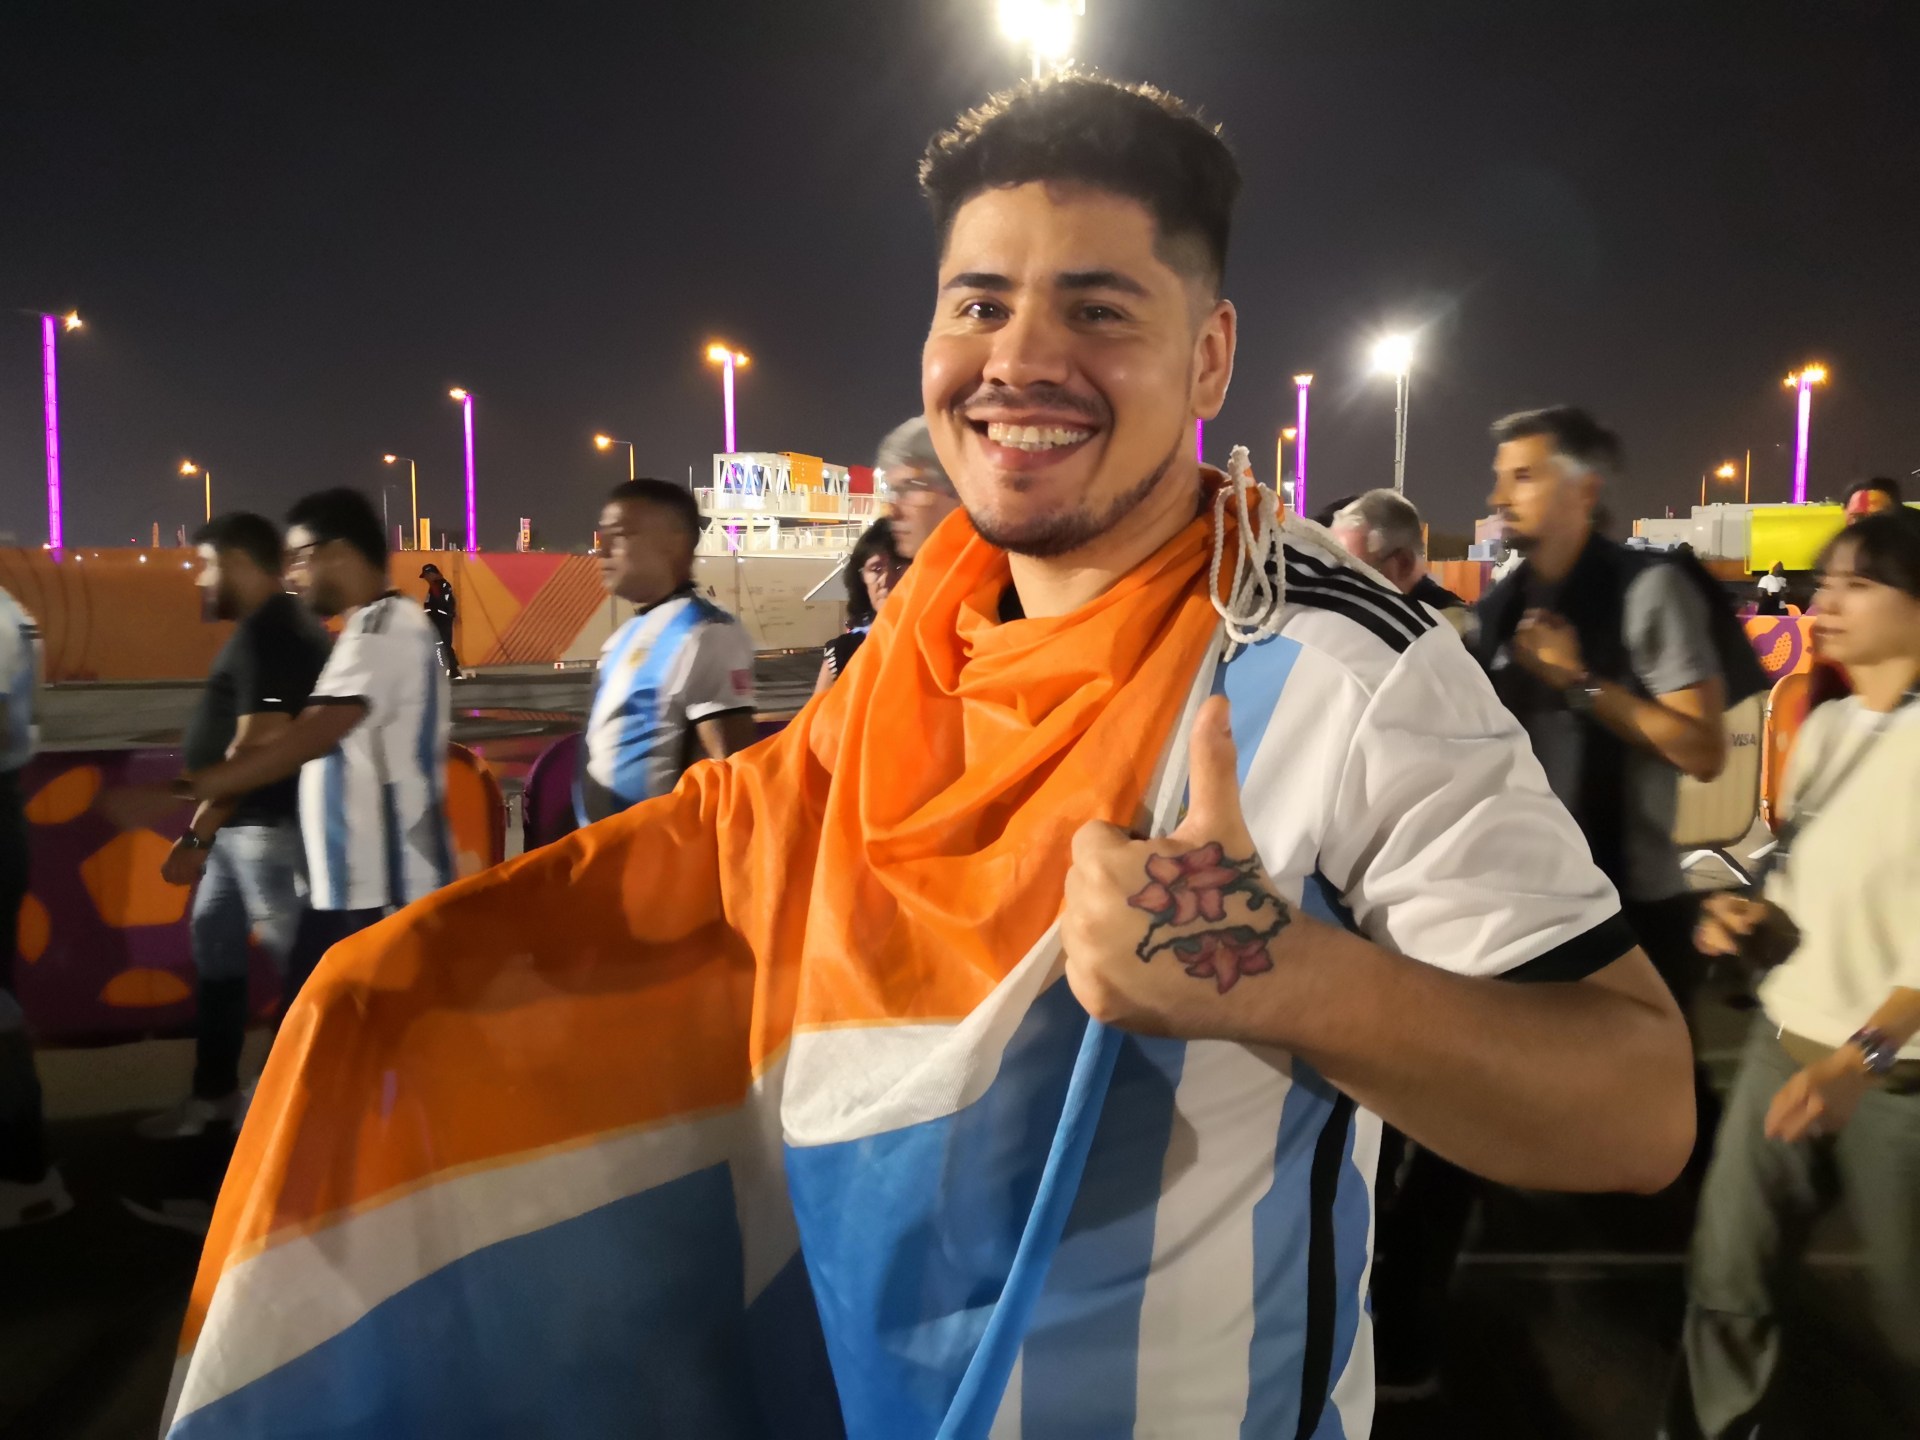 Argentina fans ‘want to win the cup for Messi’